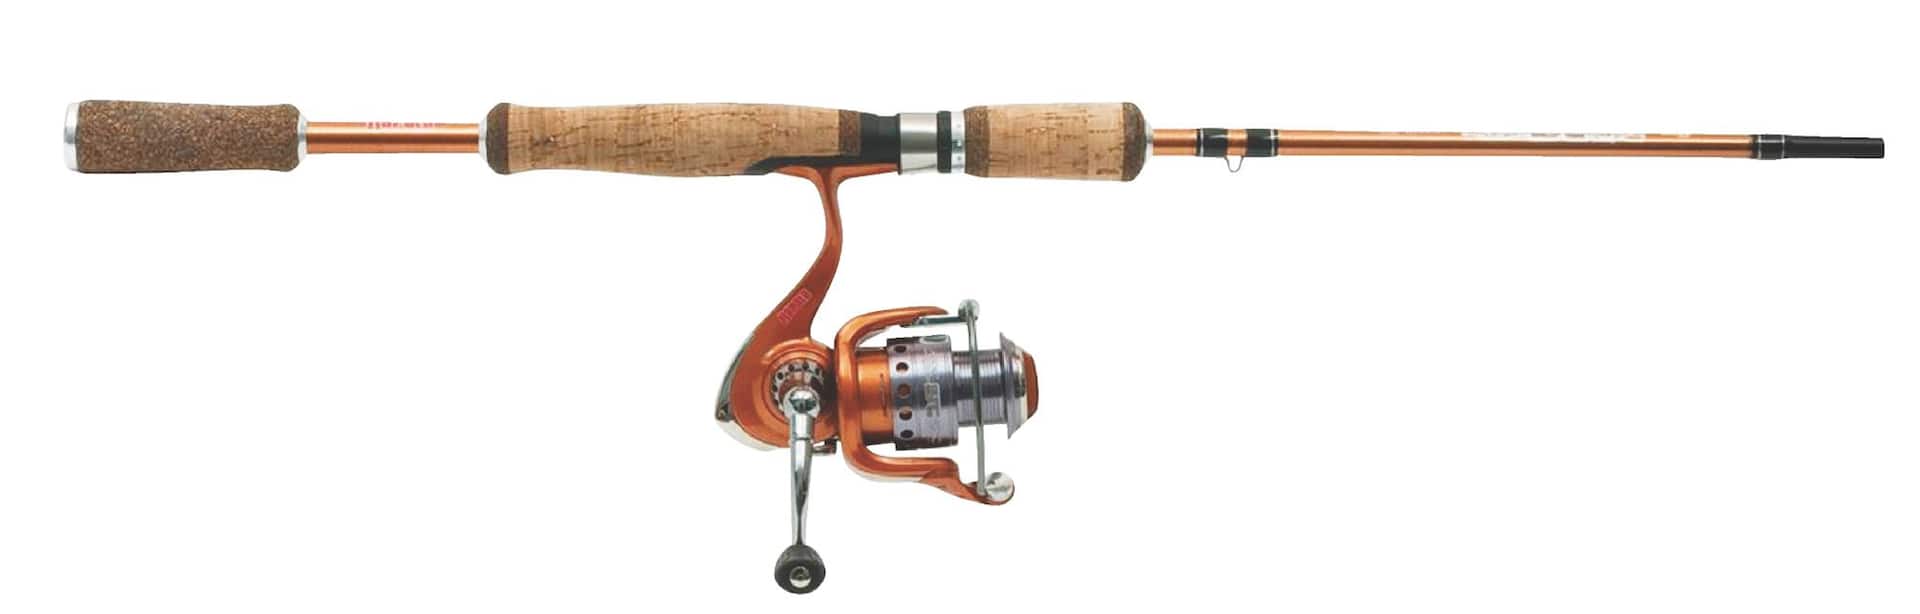 Xcalibur X80 Spinning Fishing Rod and Reel Combo, Pre-Spooled, Medium, 6.6- ft, 2-pc